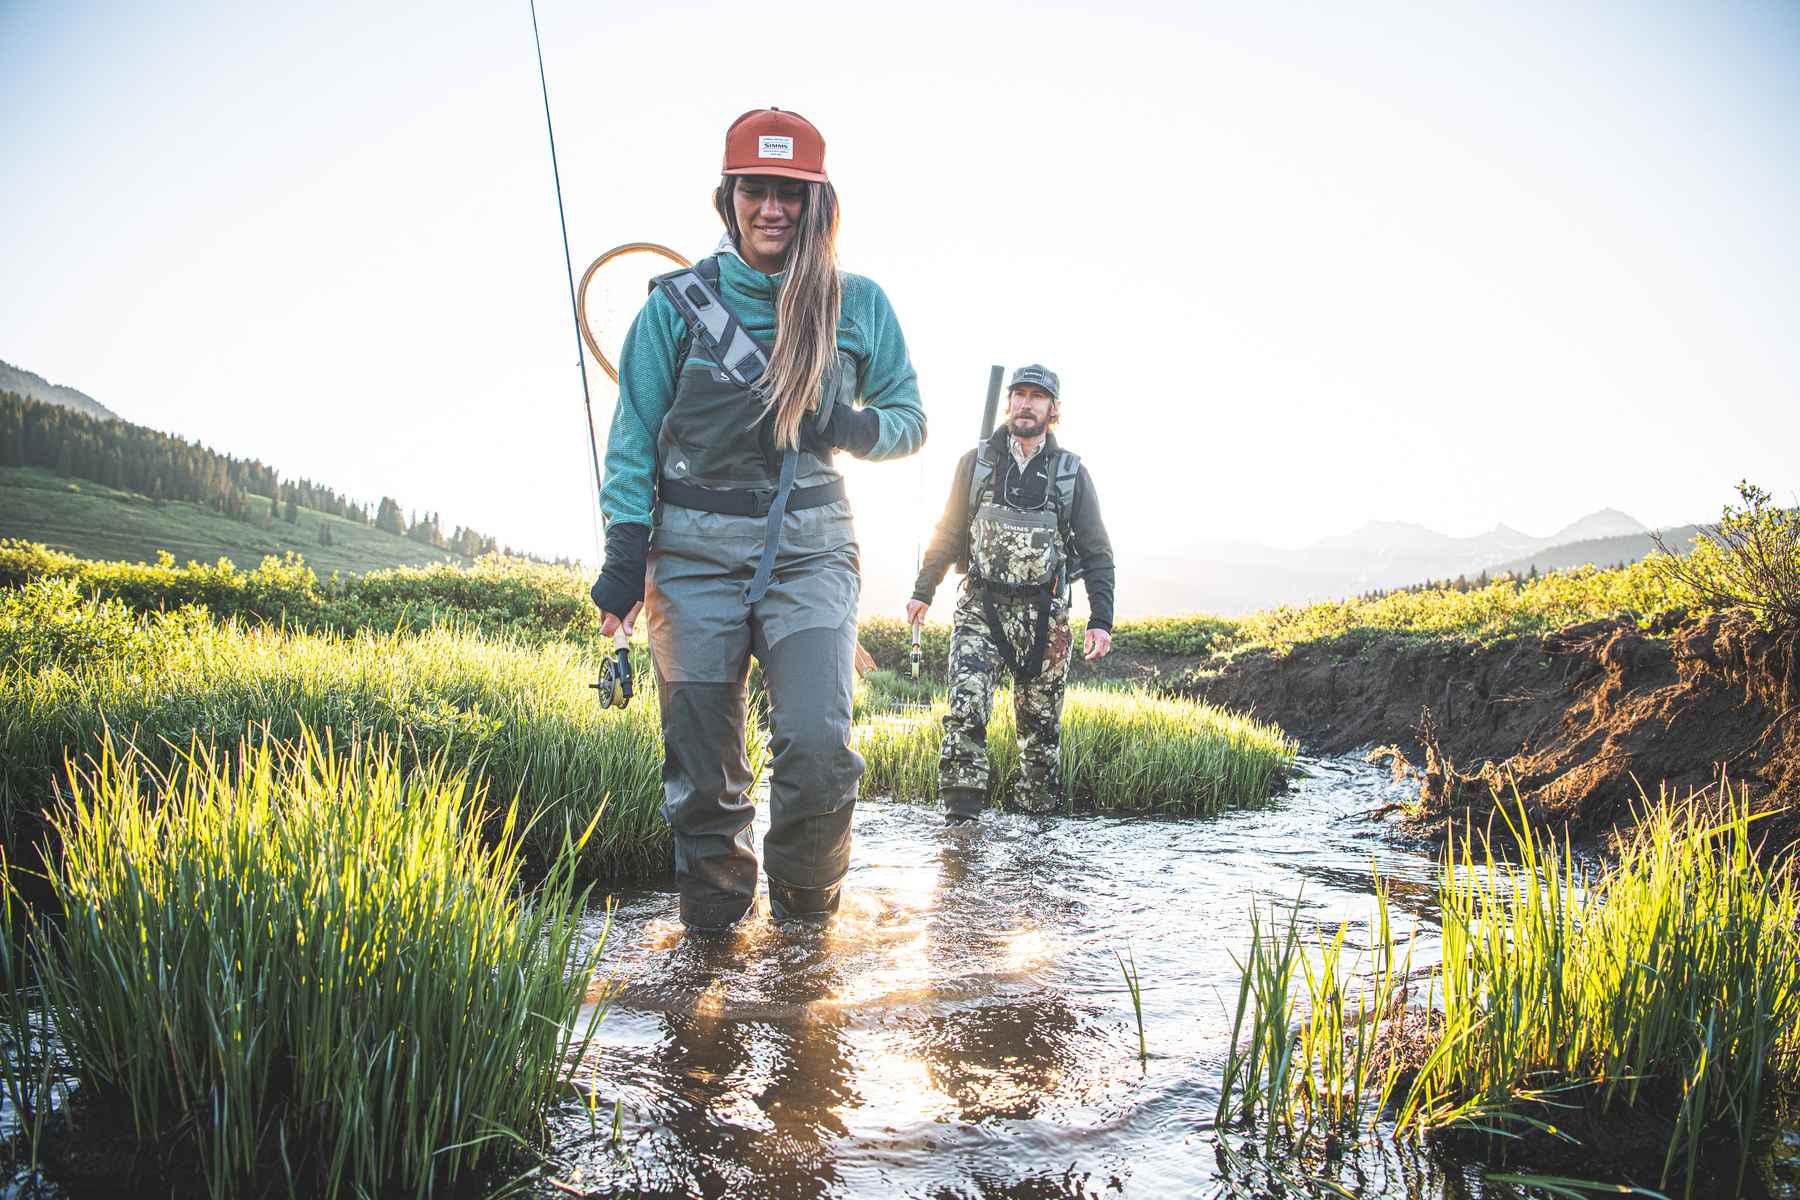 simmsfishing wins the BEST NEW Wader award for the upcoming G4Z